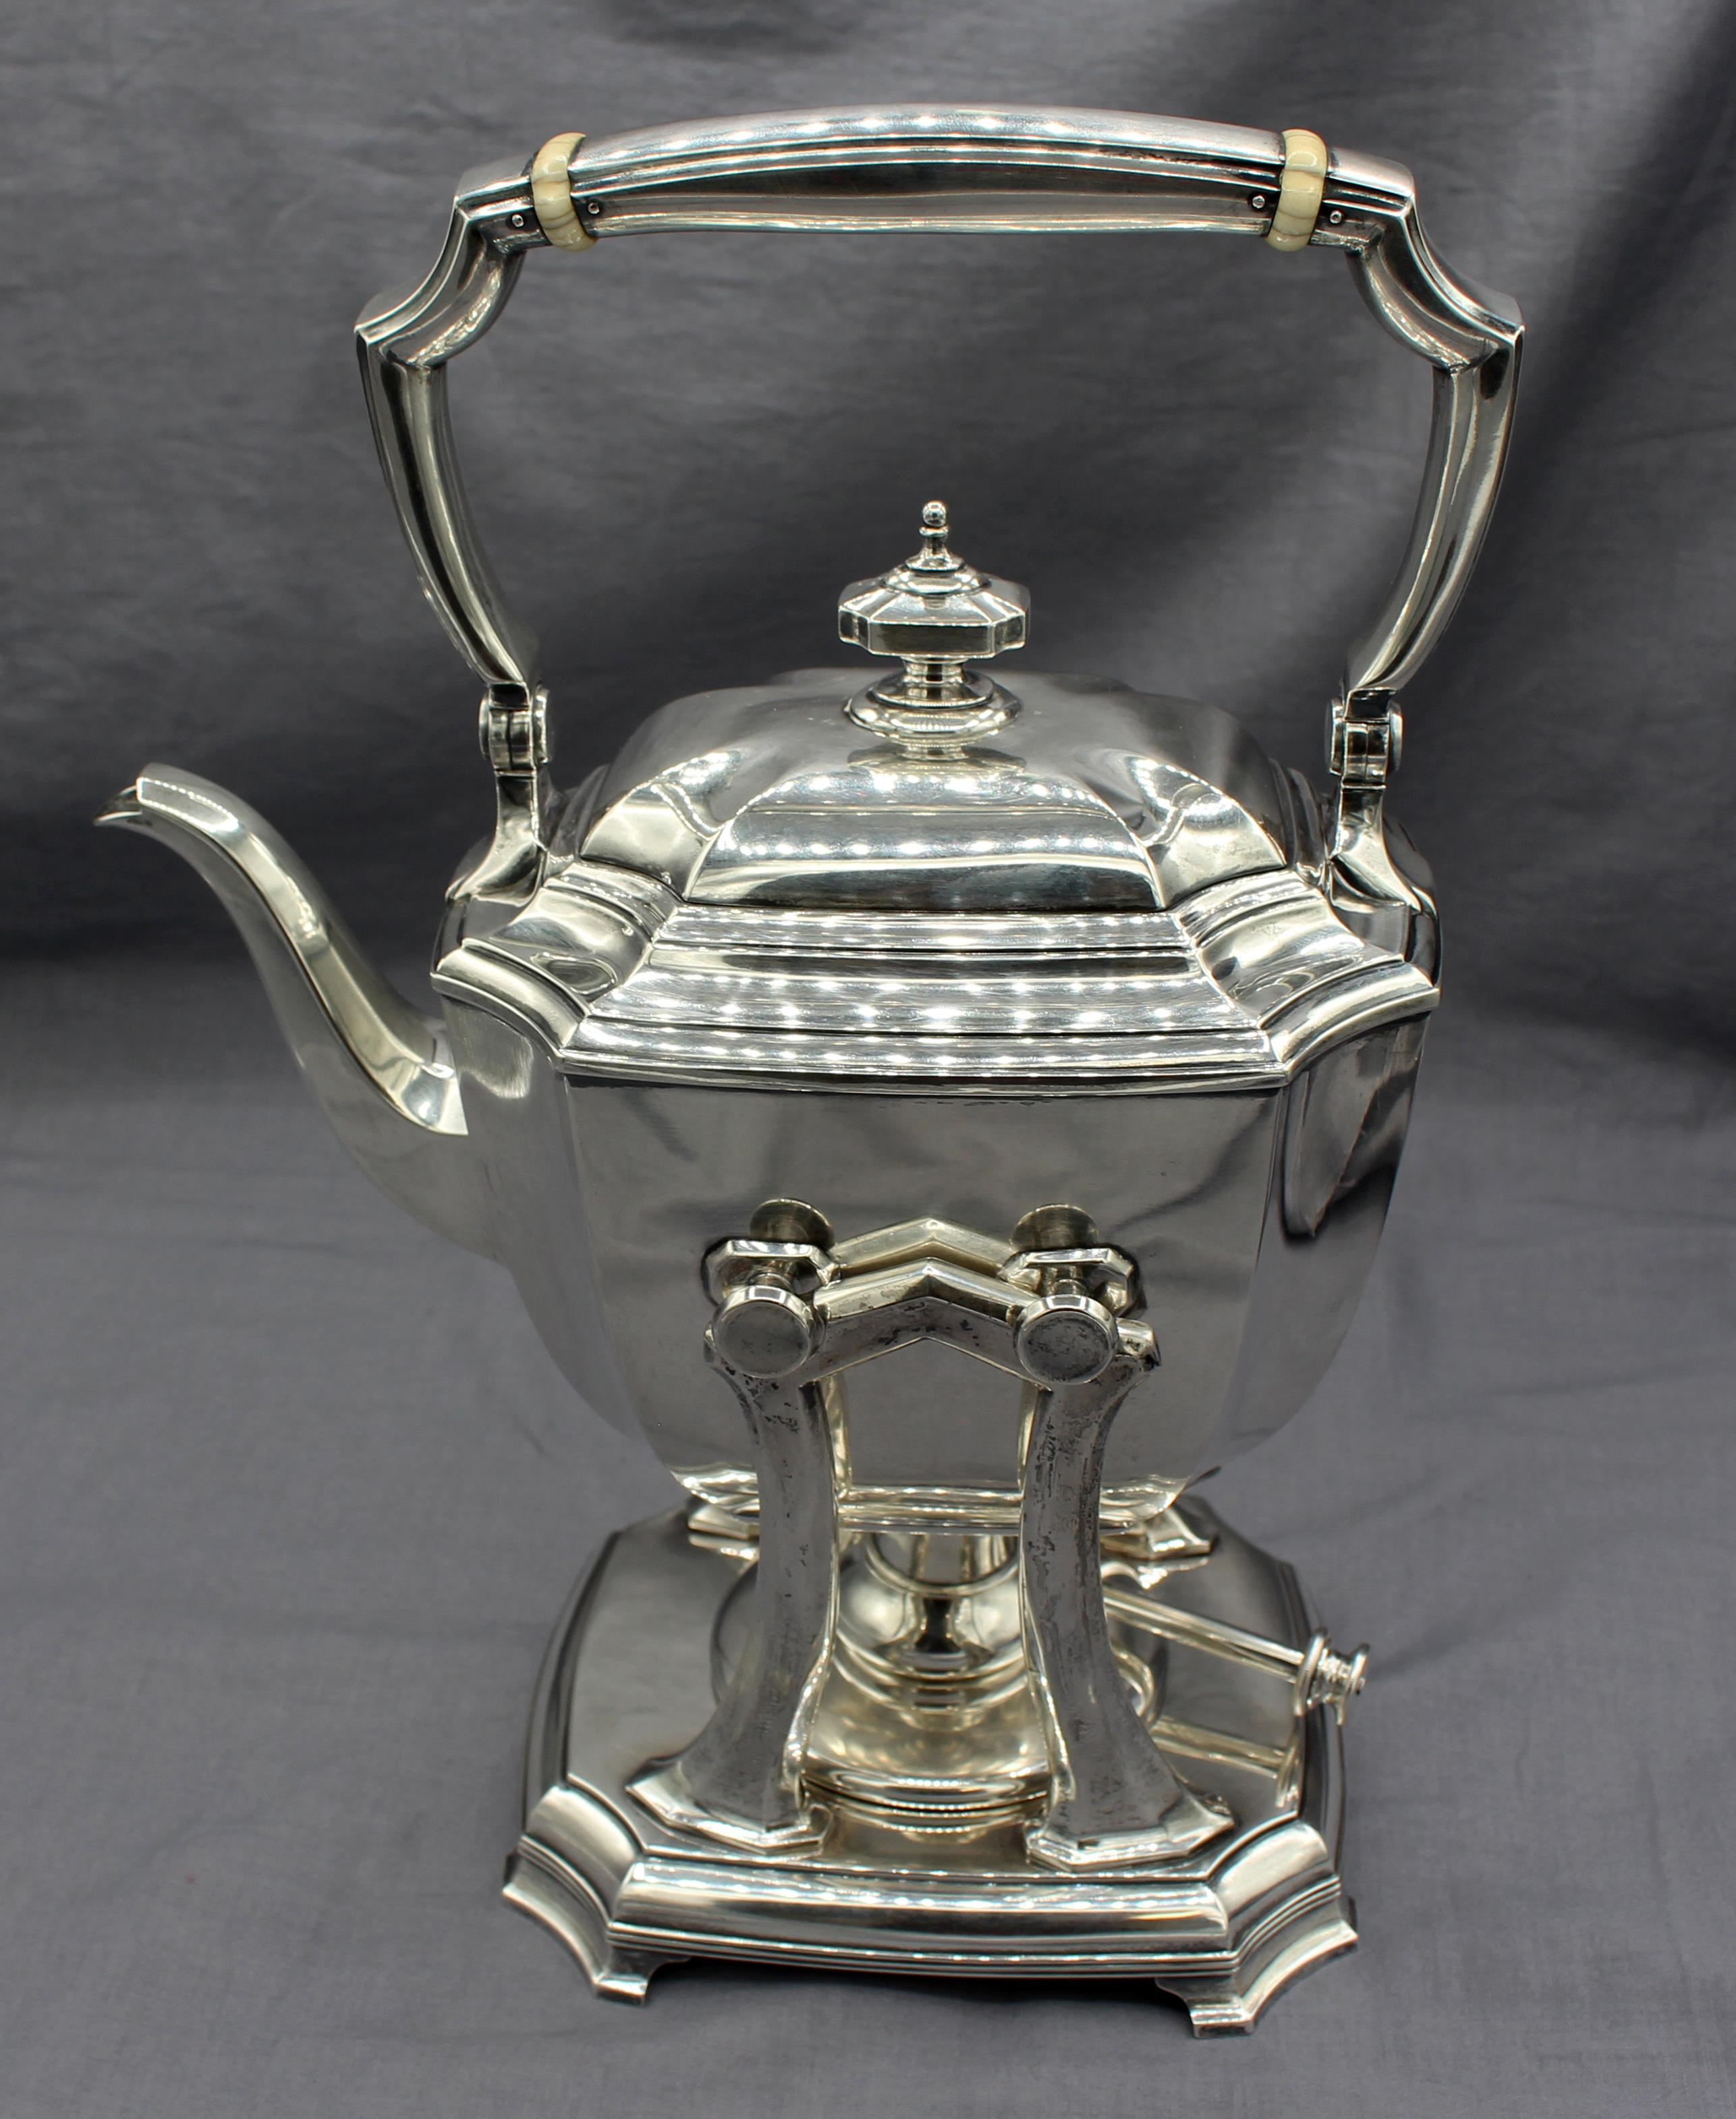 Sterling silver 4-piece tea service by Tiffany, Hampton pattern, circa 1920s-30s. Marked: 